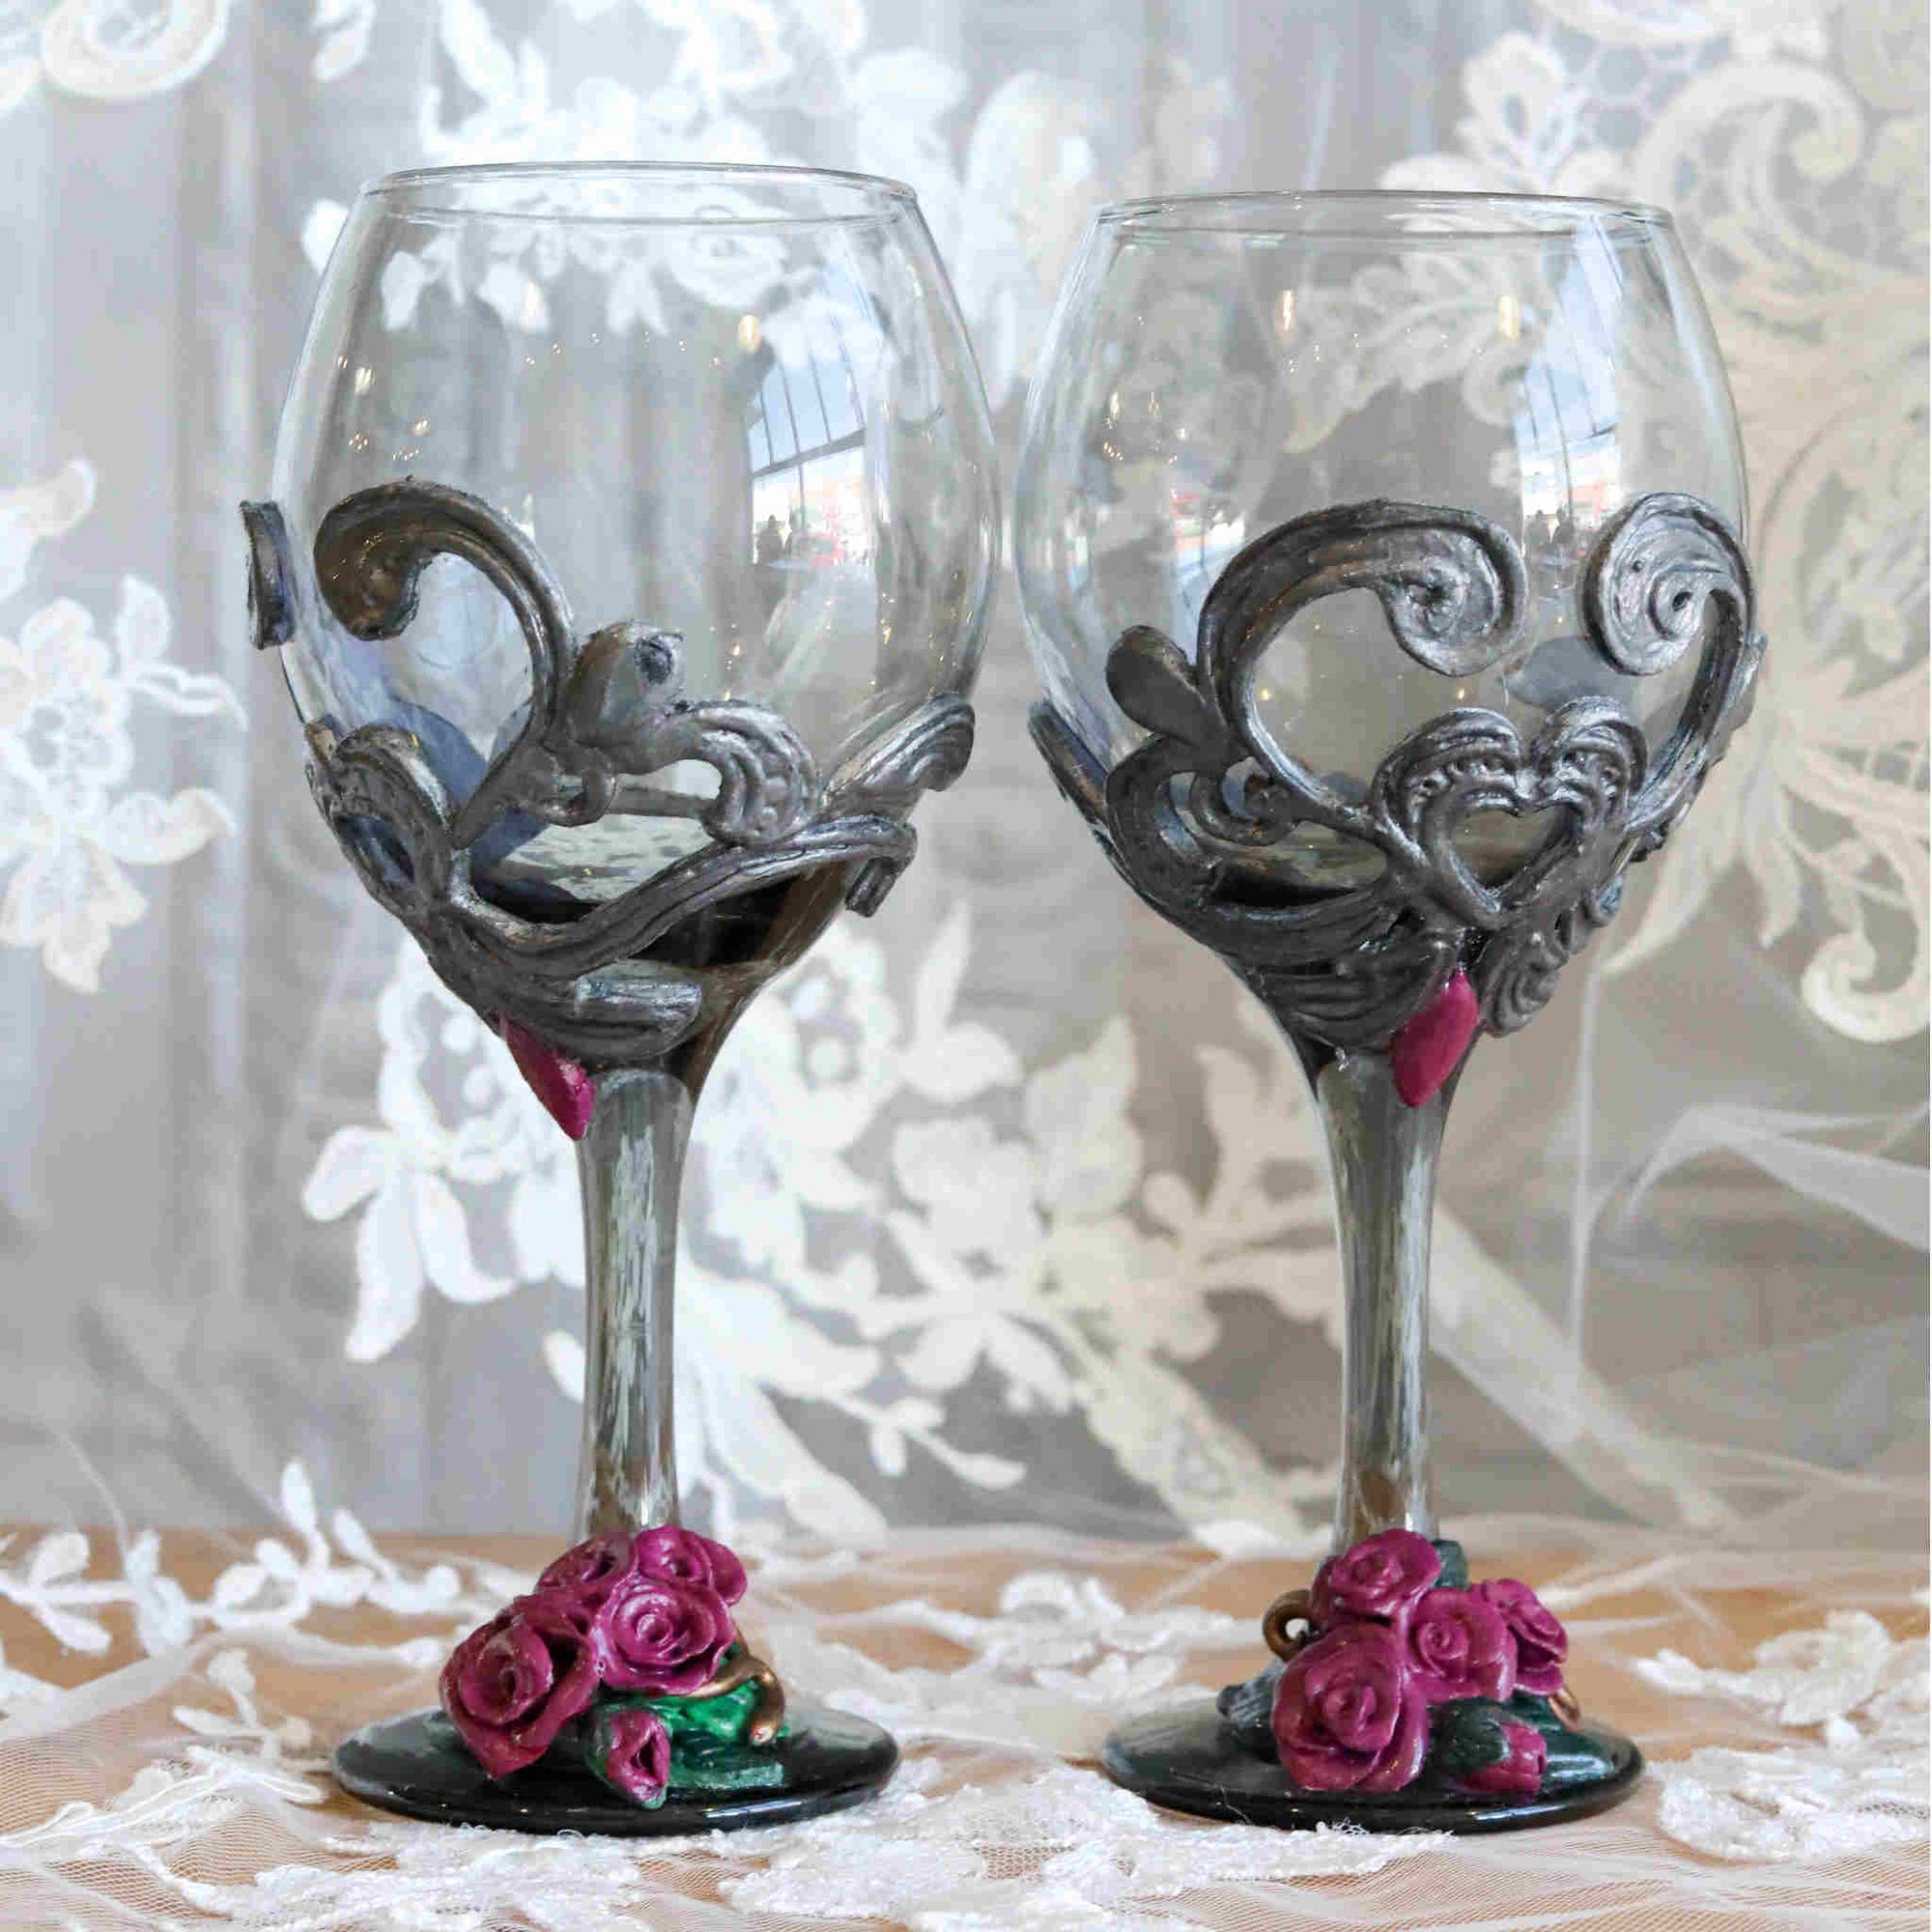 Bring the classic Victorian era to your wedding day or anniversary celebration. Each black-tinted glass is hand-scuplted with burgundy roses laid within a metal-inspired polymer and clay pattern.